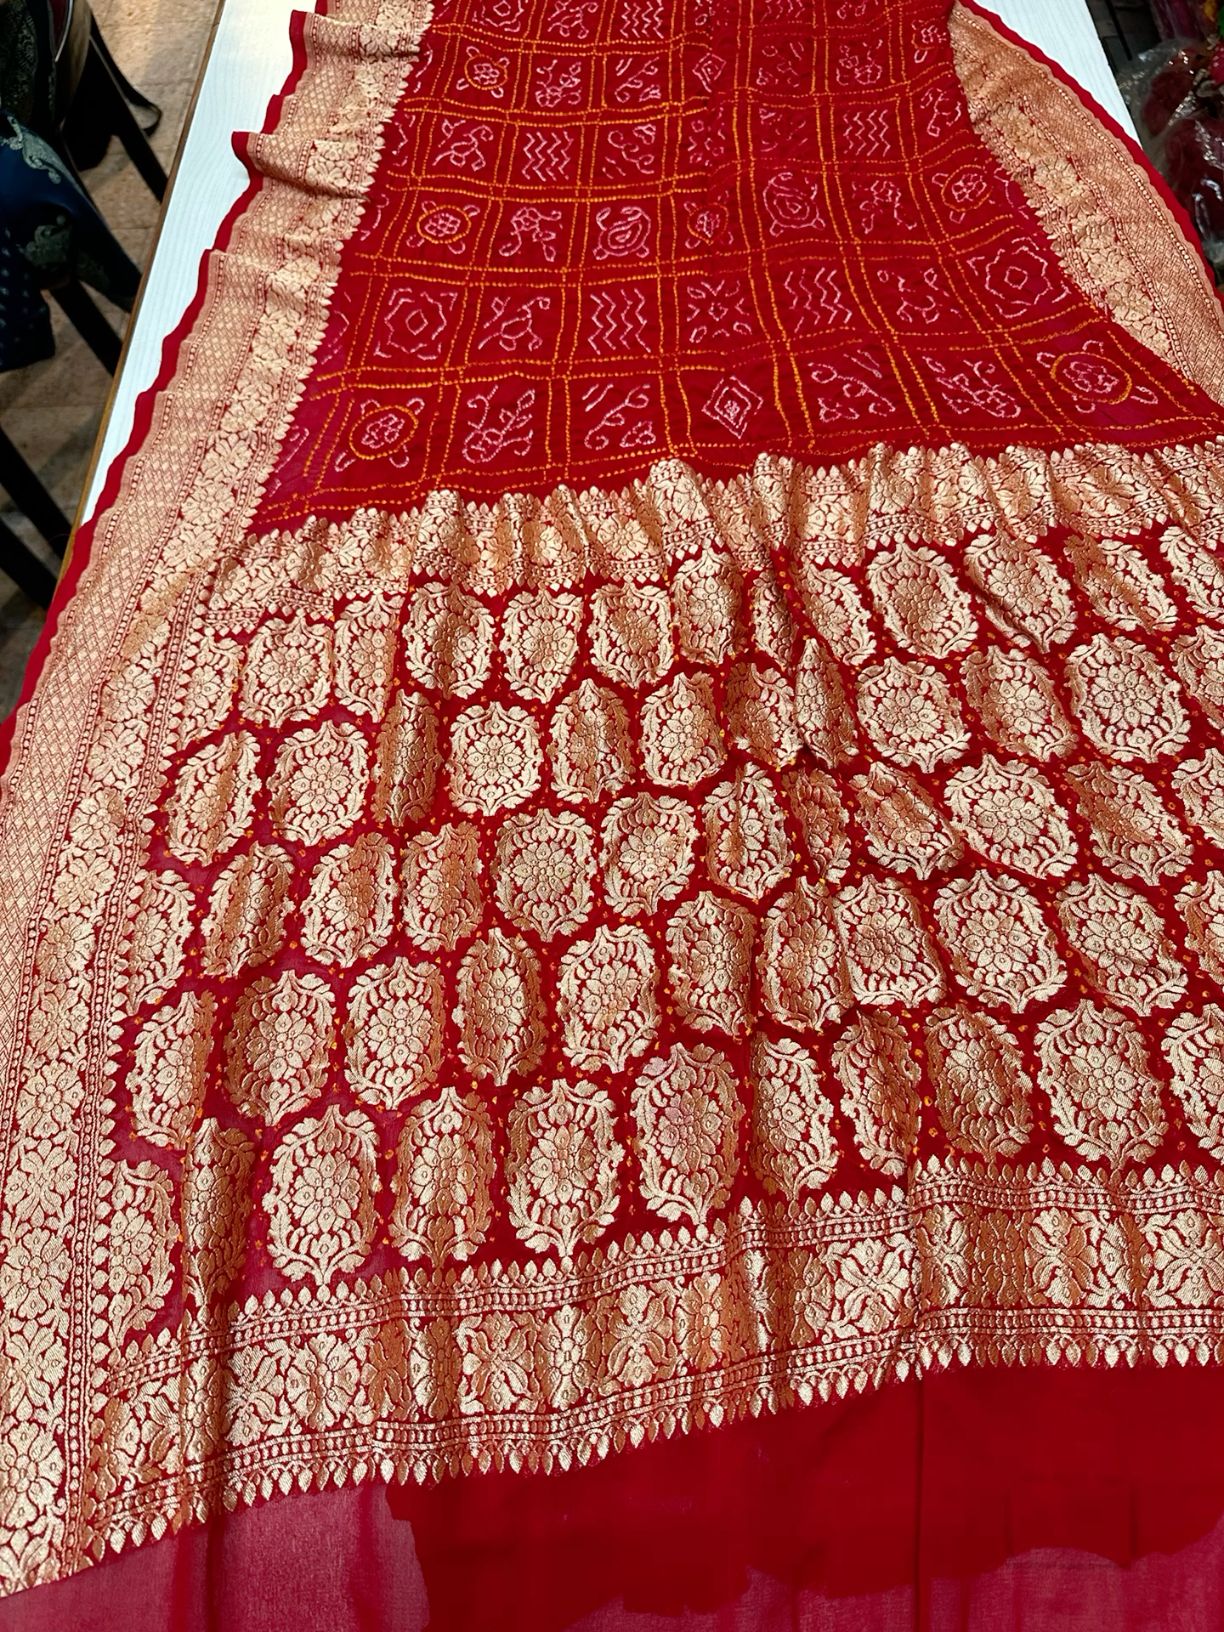 Traditional Treasures: Gharchola Sarees for Ethnic Elegance